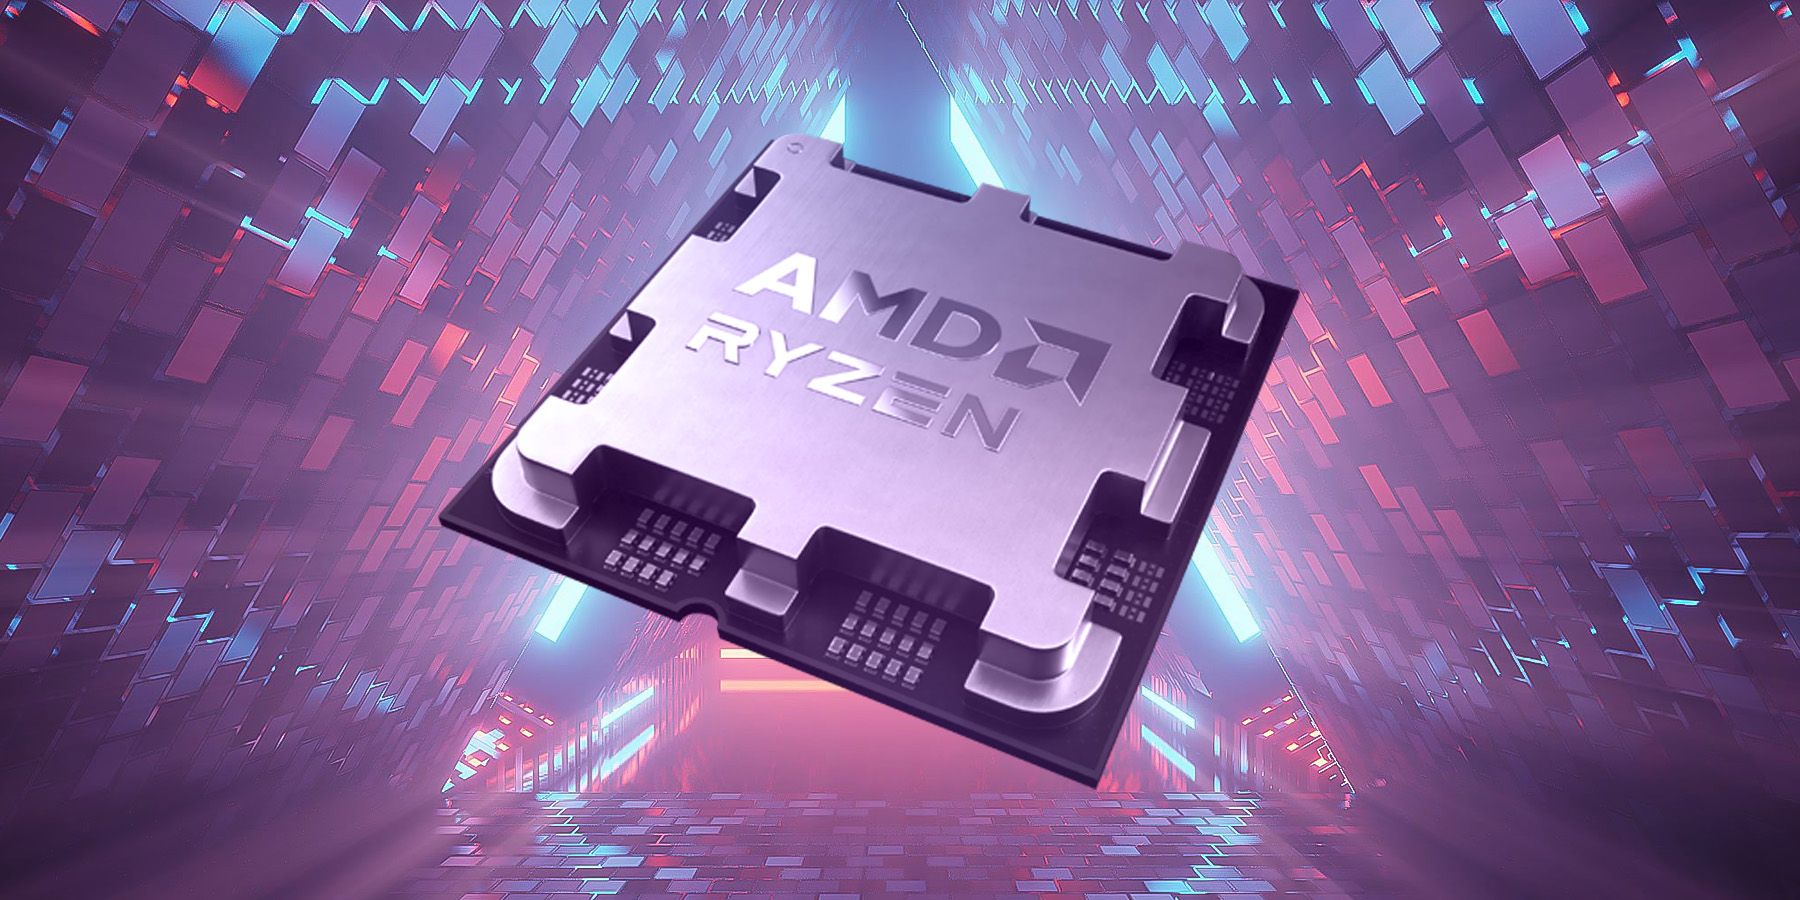 Everything You Need To Know About AMD 7950X3D: Specs/Price/Dates